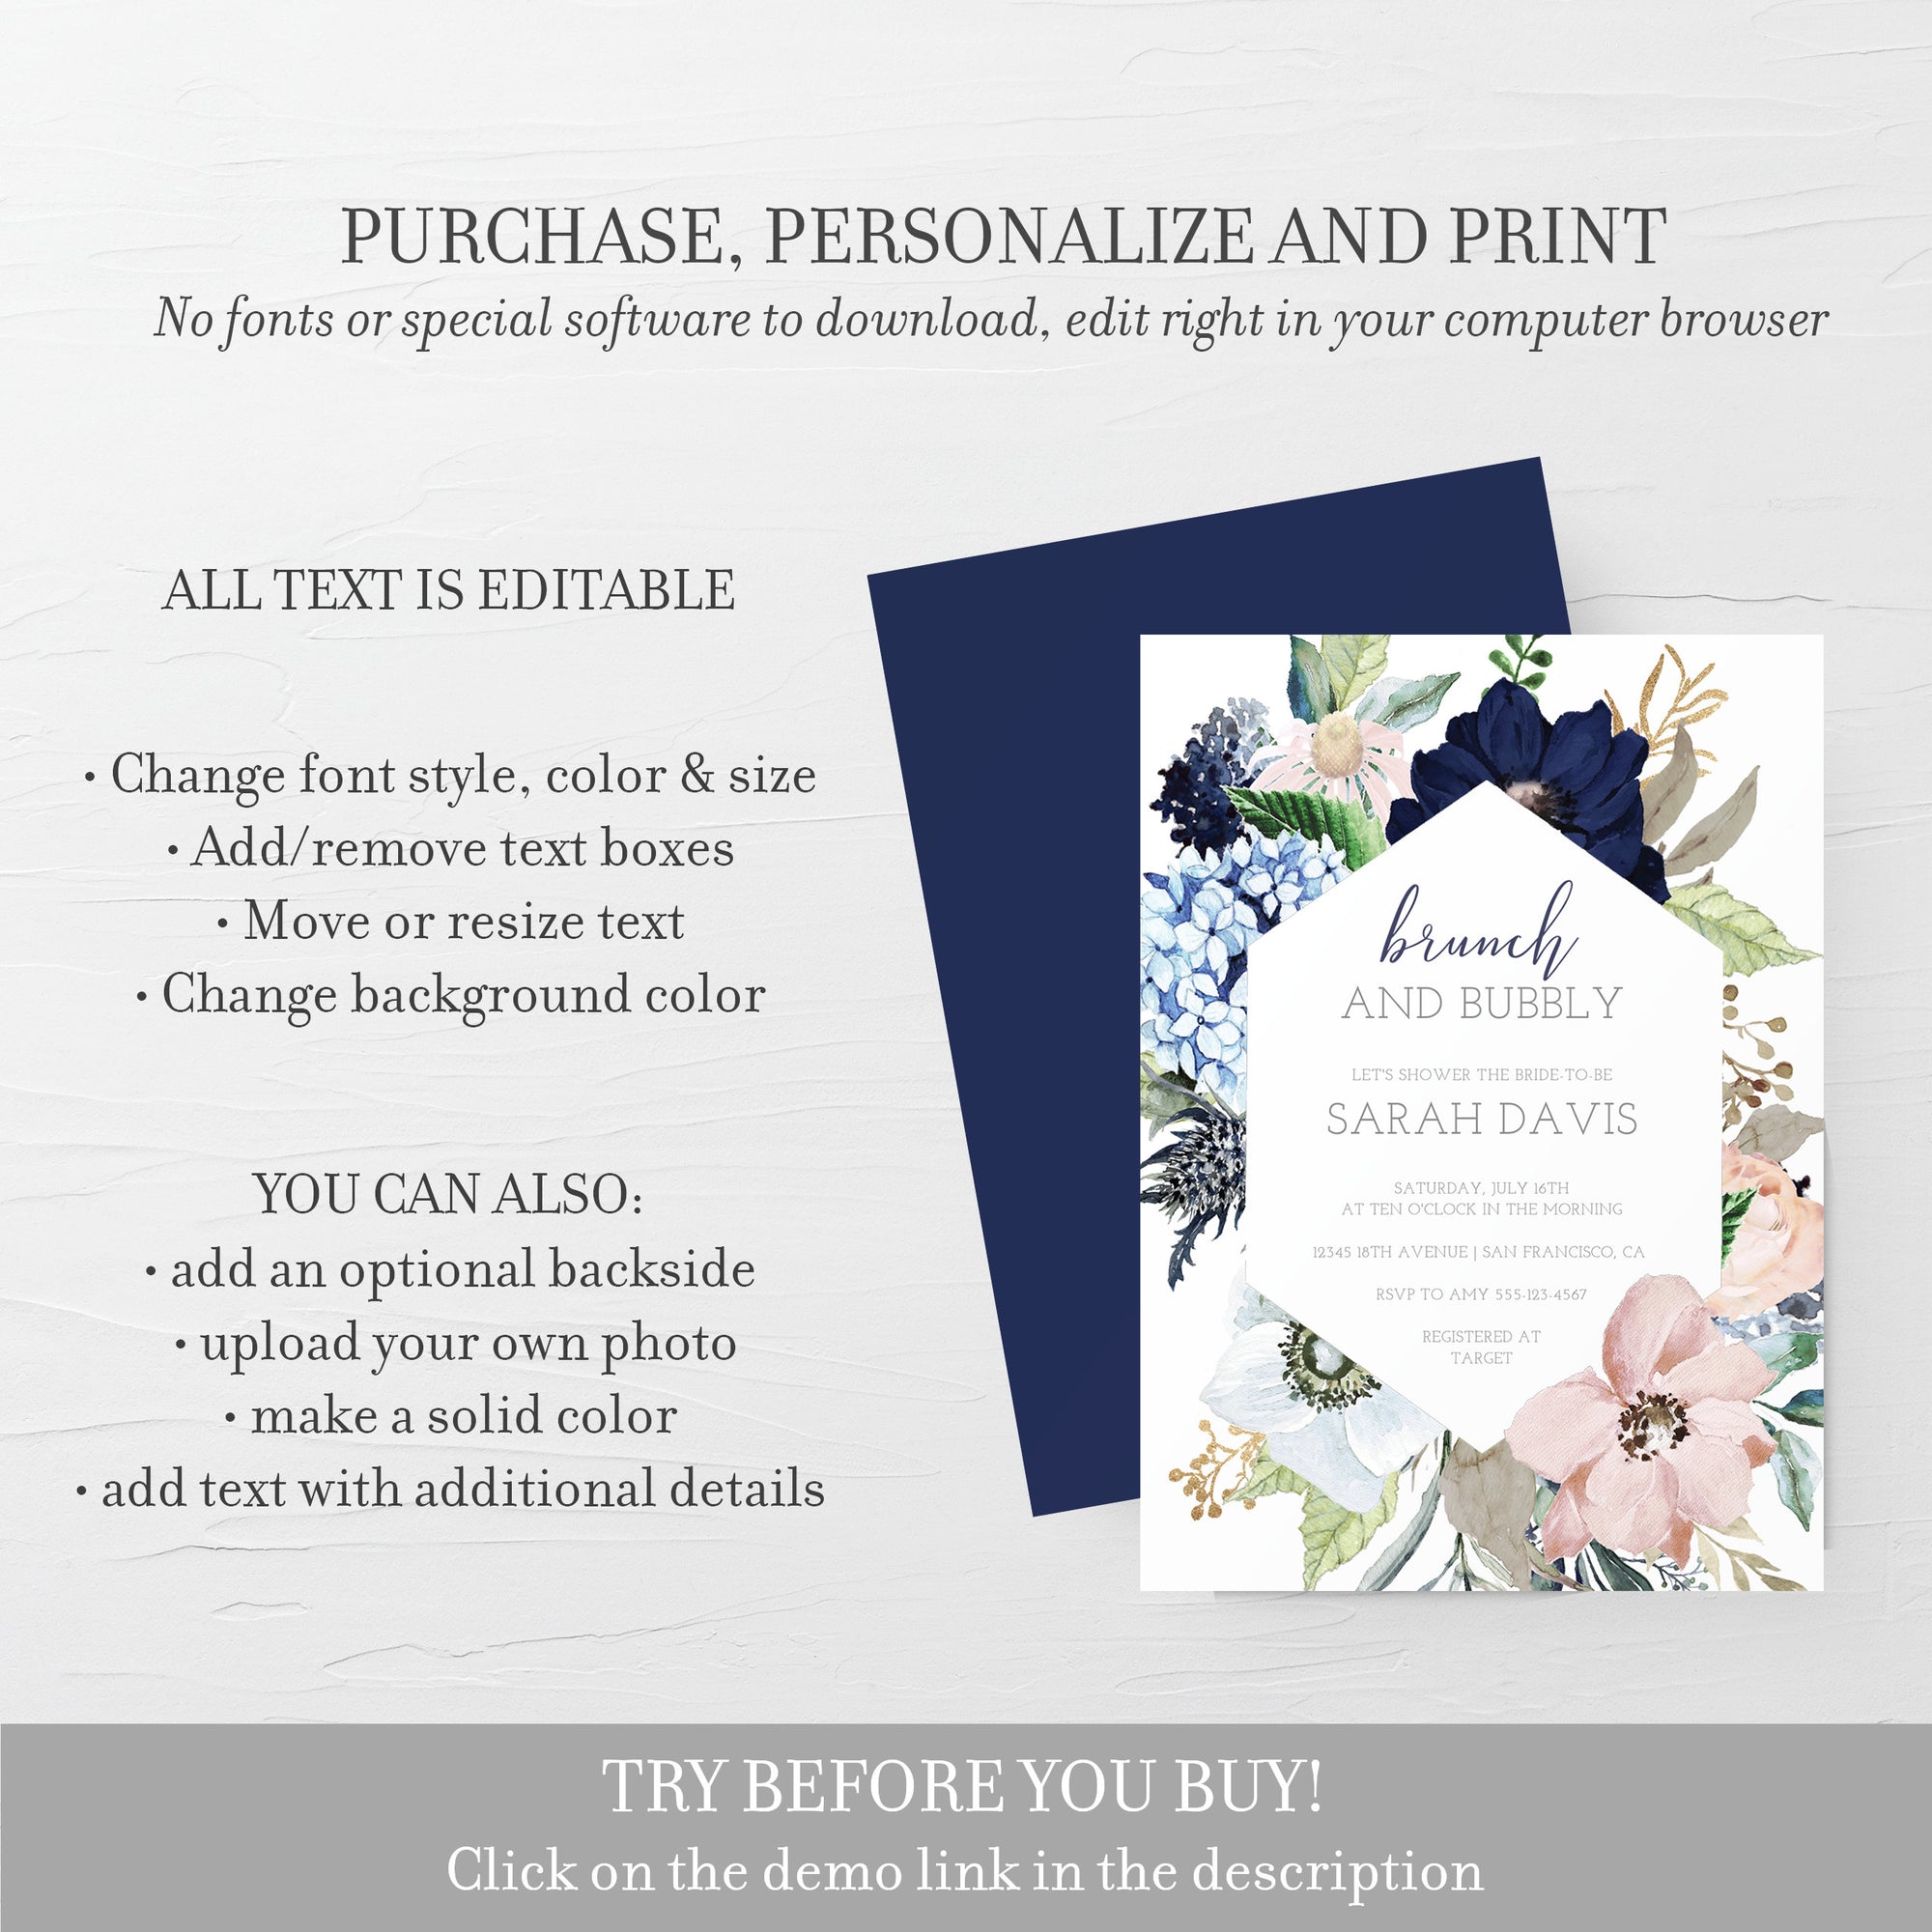 Brunch and Bubbly Bridal Shower Invitation Template, Navy and Blush Bridal Shower Invite, Brunch Bridal Shower Invite, 5x7 DIGITAL - MB100